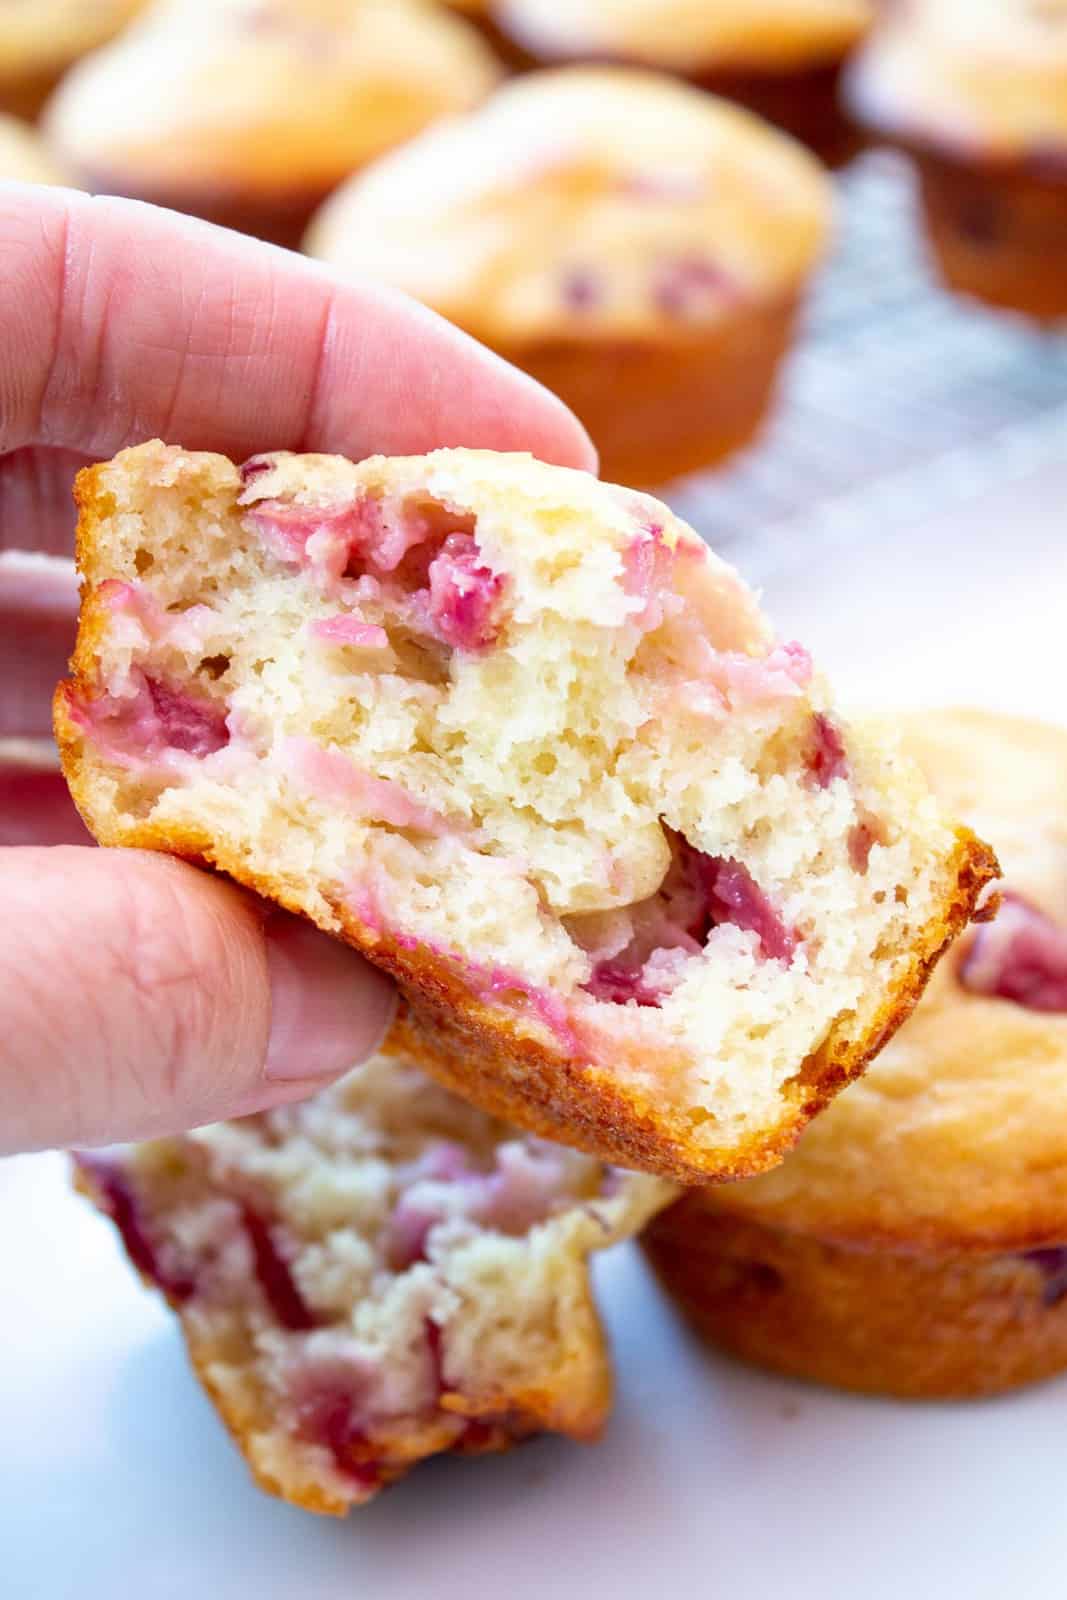 A half of a muffin filled with cherries held in one hand.